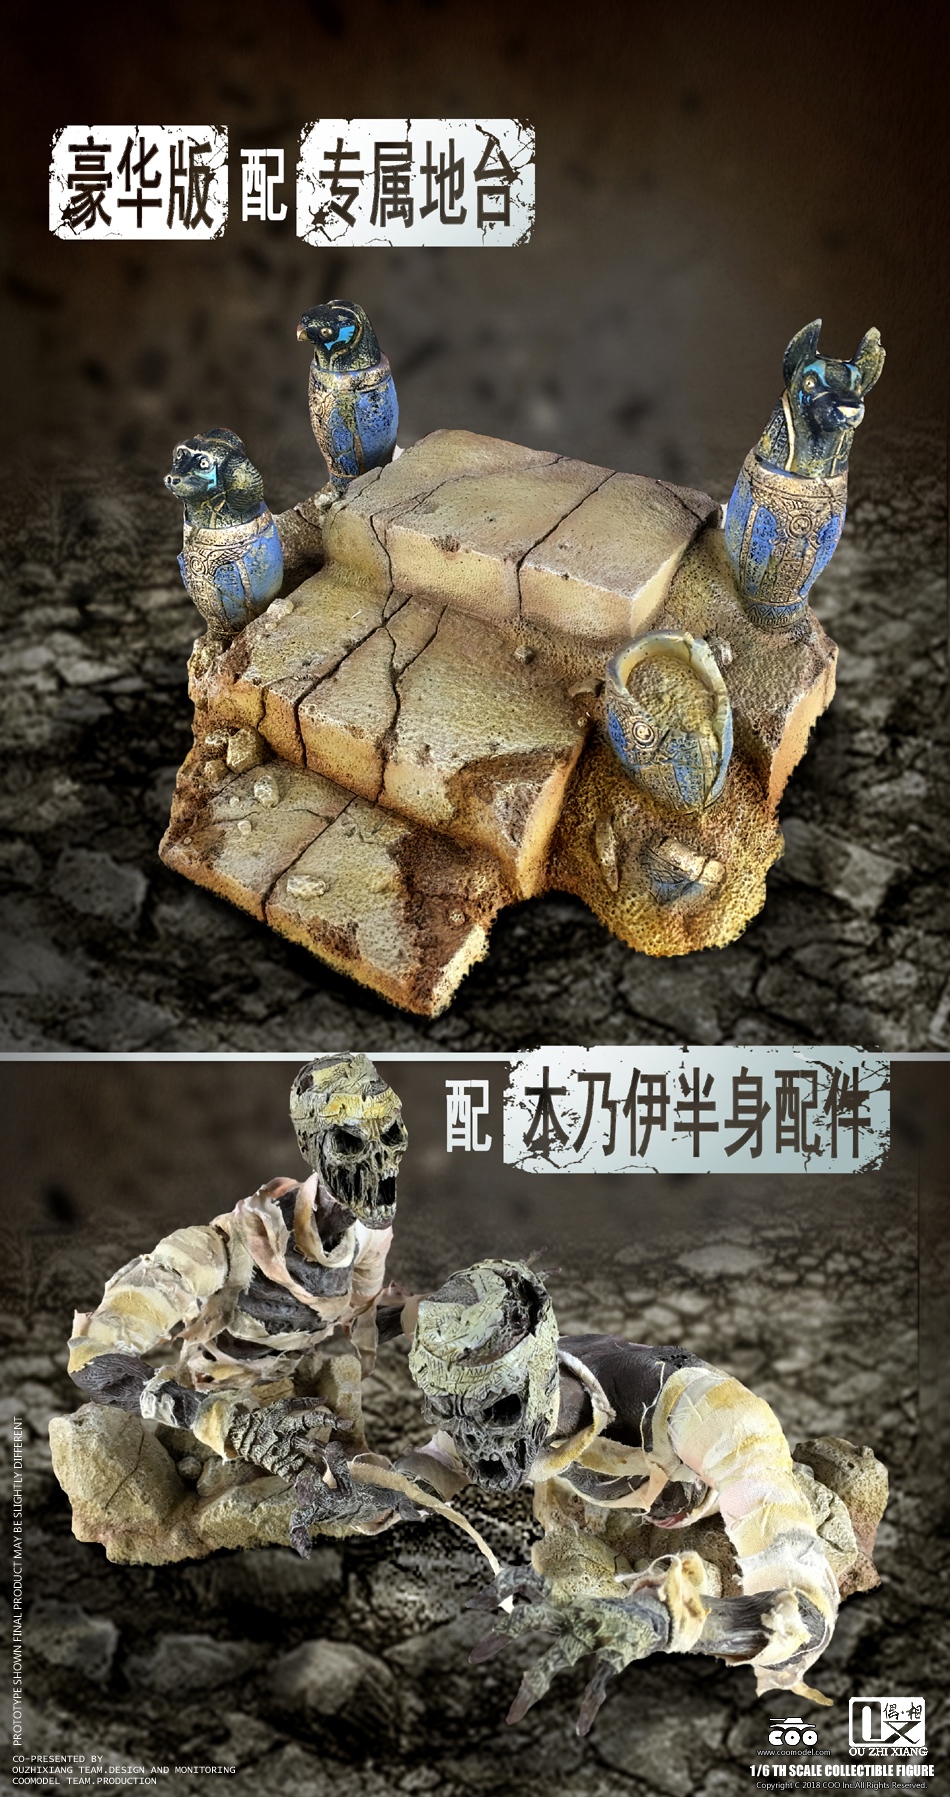 Ouzhixiang - NEW PRODUCT: COOMODEL X OUZHIXIANG 1/6 MONSTER FILE SERIES - MUMMY -Standard Ver & Deluxe Ver 16491110